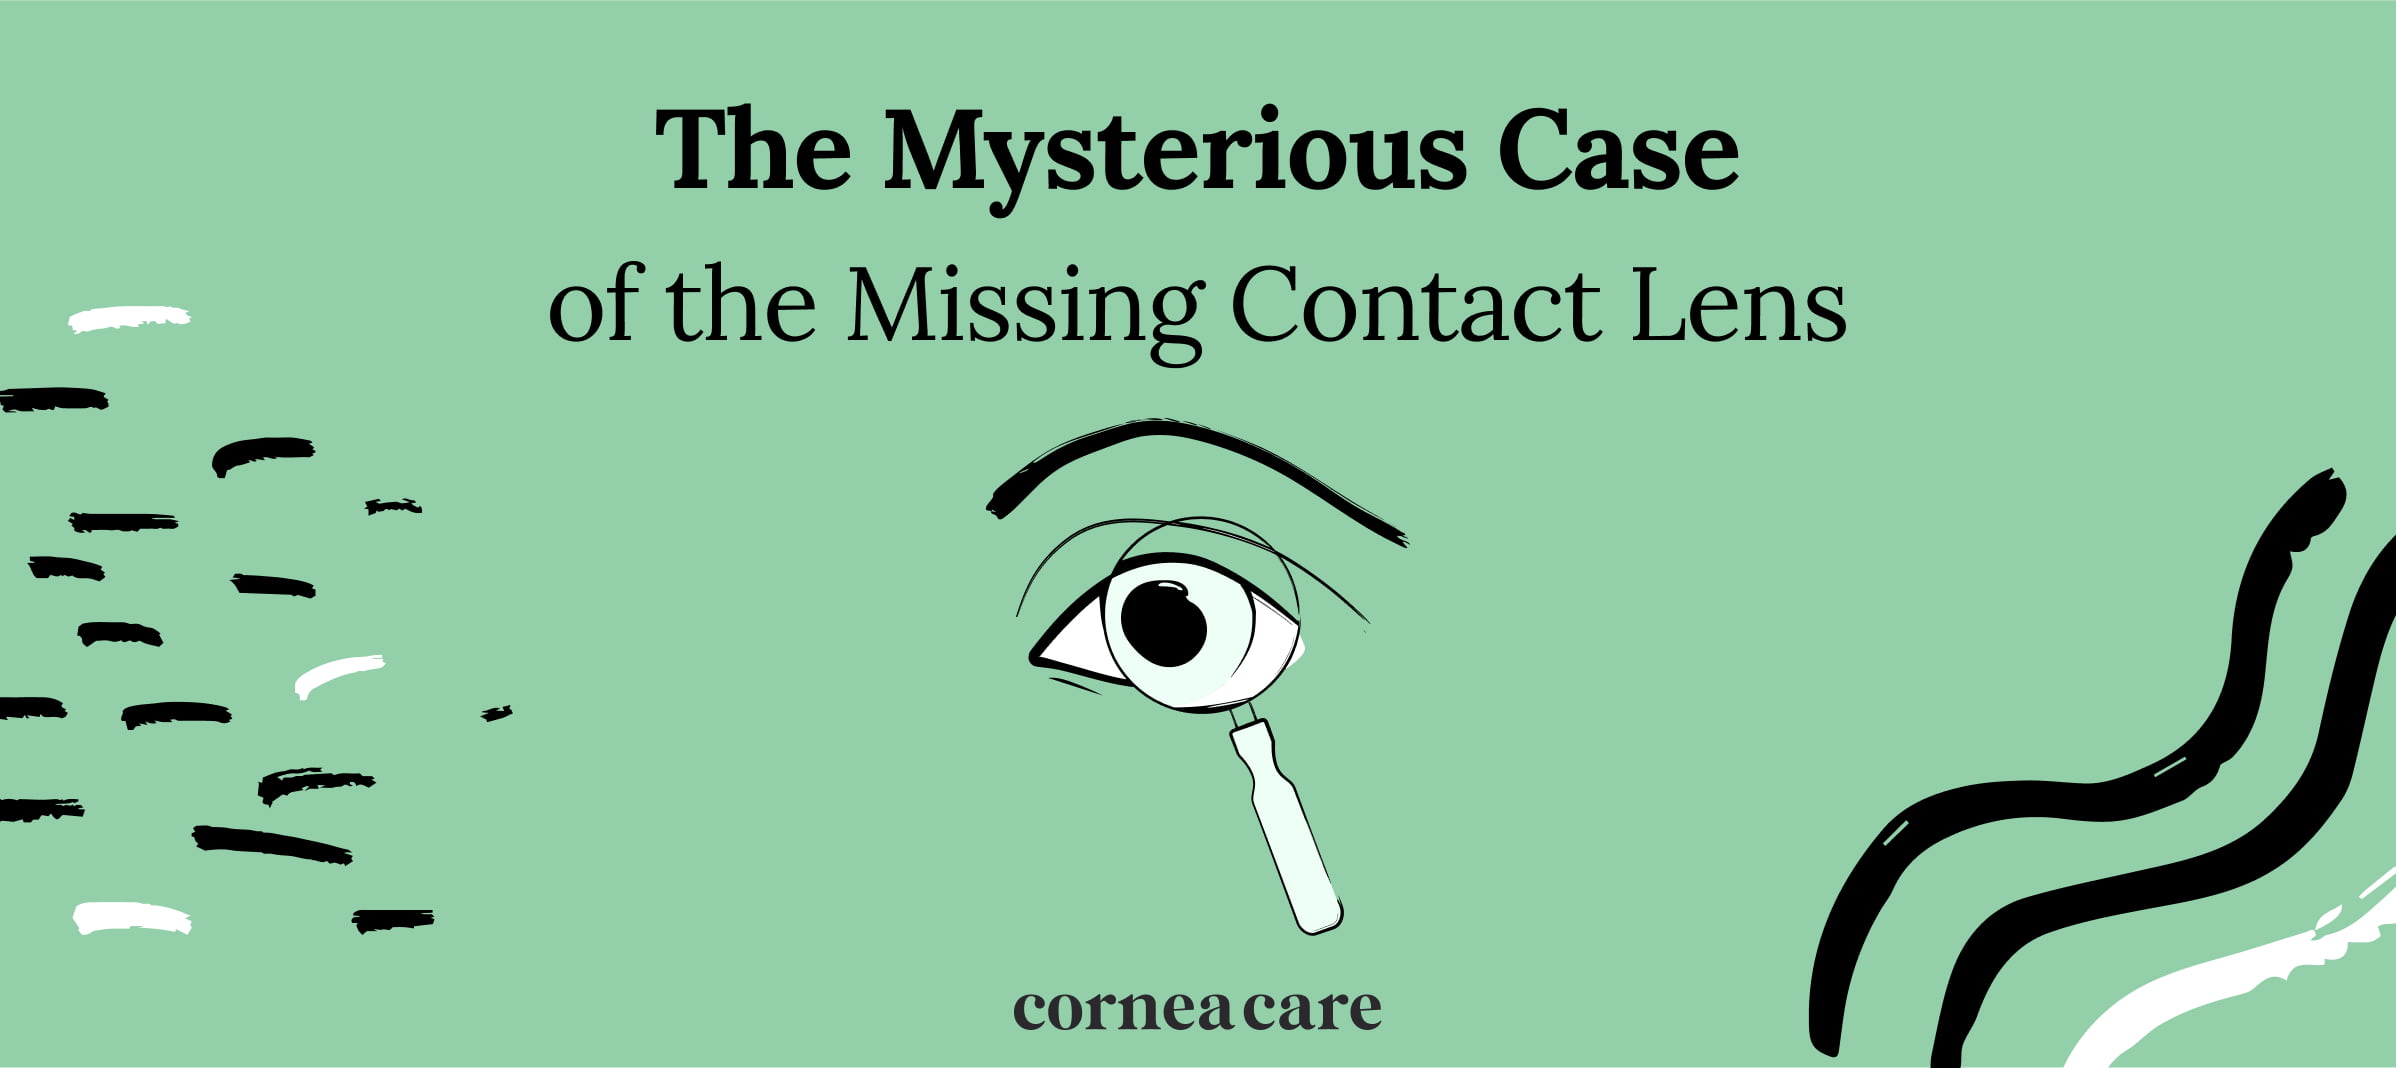 https://images.mycorneacare.com/wp-content/uploads/2023/02/how-to-tell-if-a-contact-lens-is-still-in-your-eye-1.jpg